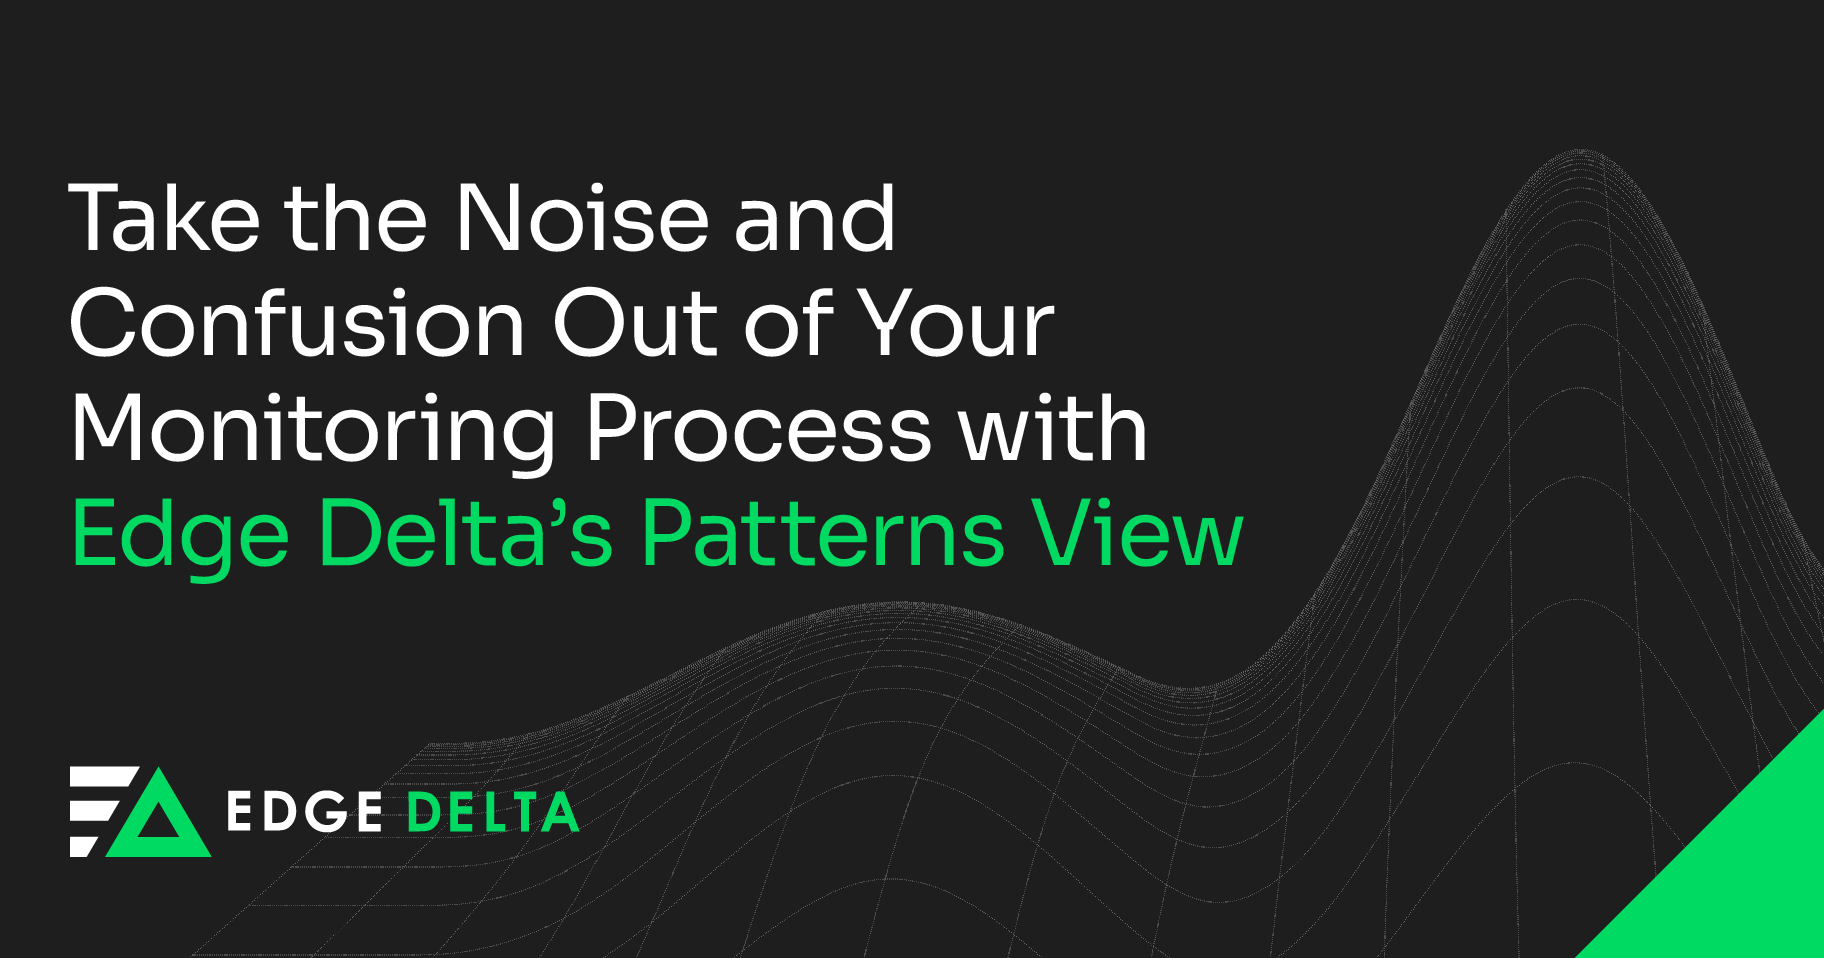 Take the Noise and Confusion Out of Your Monitoring Process with Edge Delta’s Patterns View